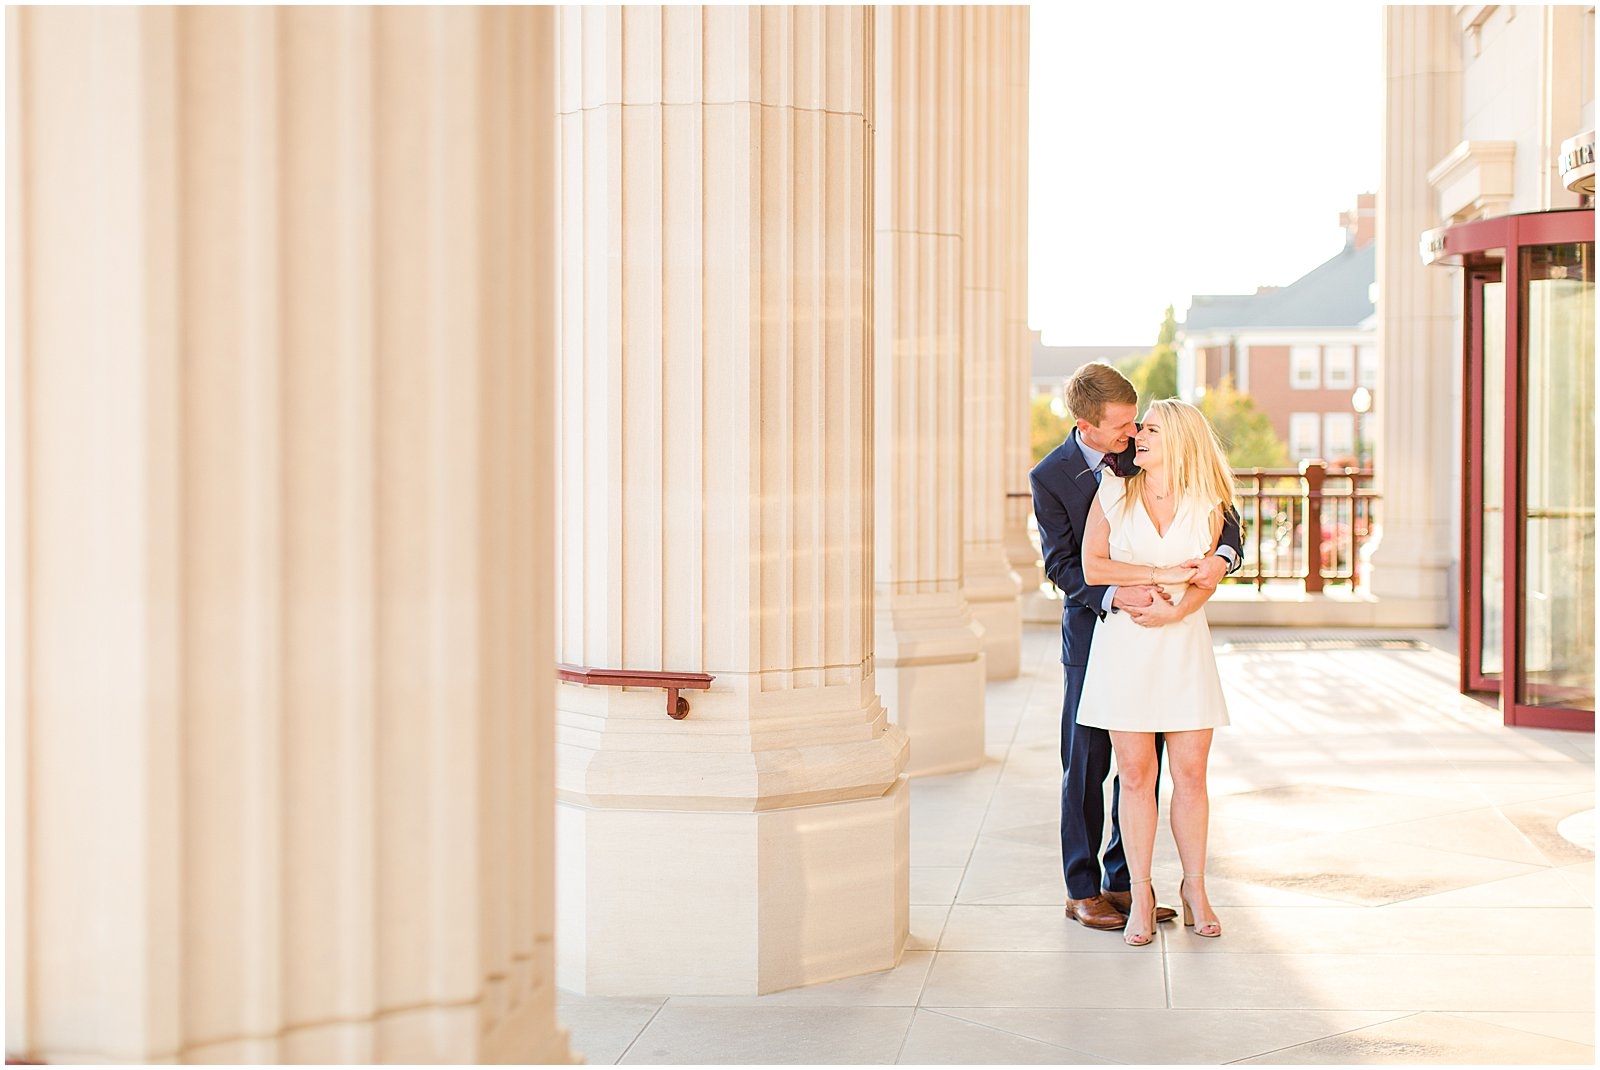 A Cute and Cuddly Engagement Session in Carmel, IN | Abbi and Josh0022.jpg